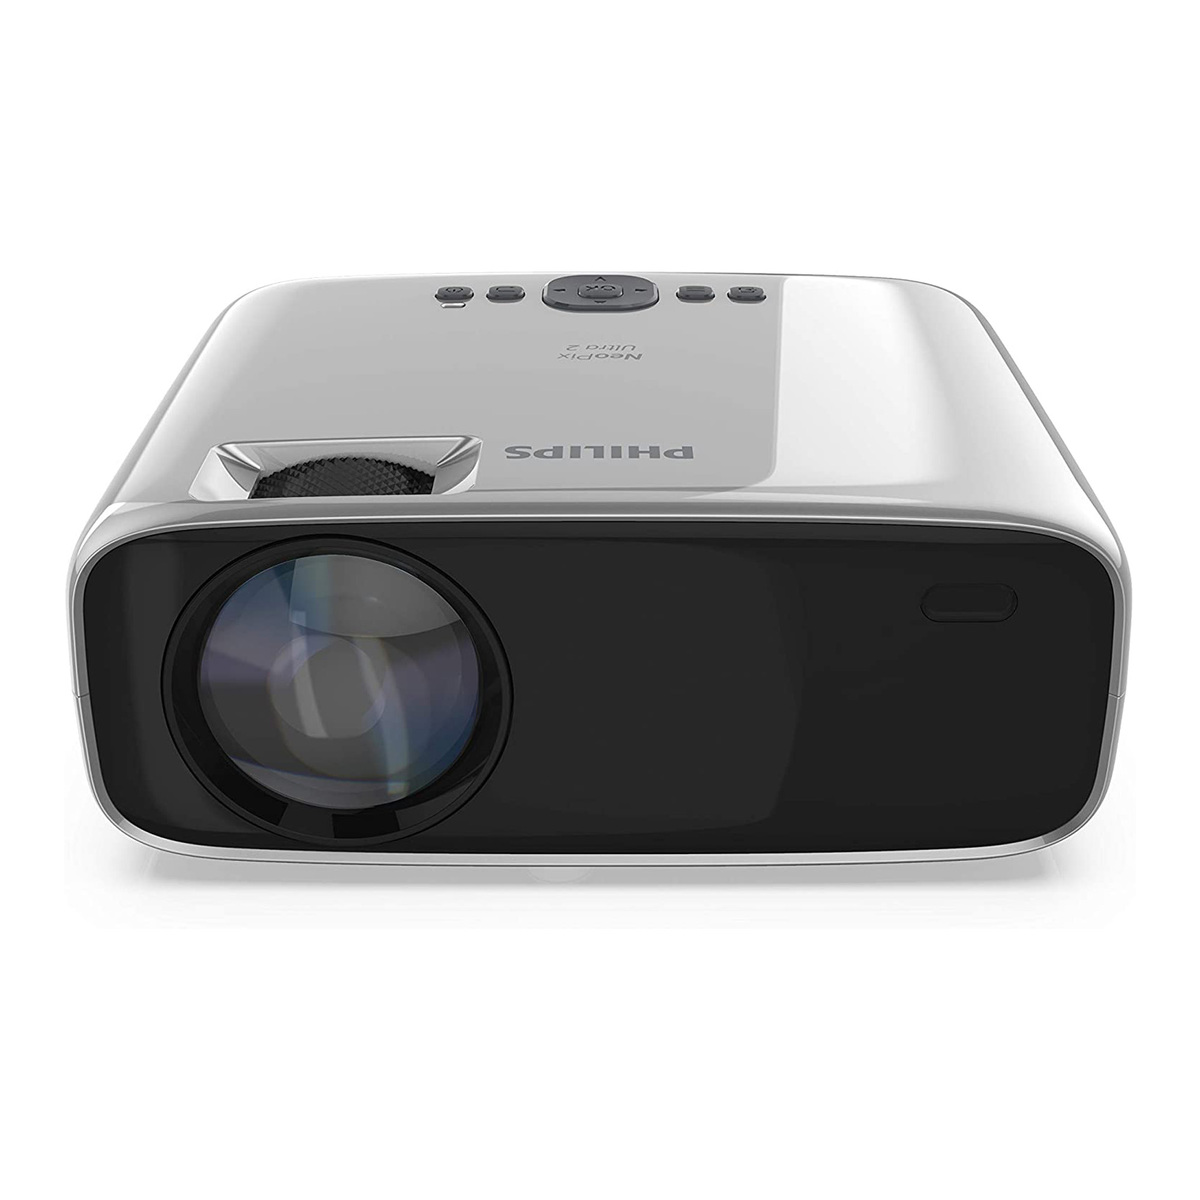 Philips NeoPix Ultra 2, True Full HD Projector with Apps and Built-in Media Player